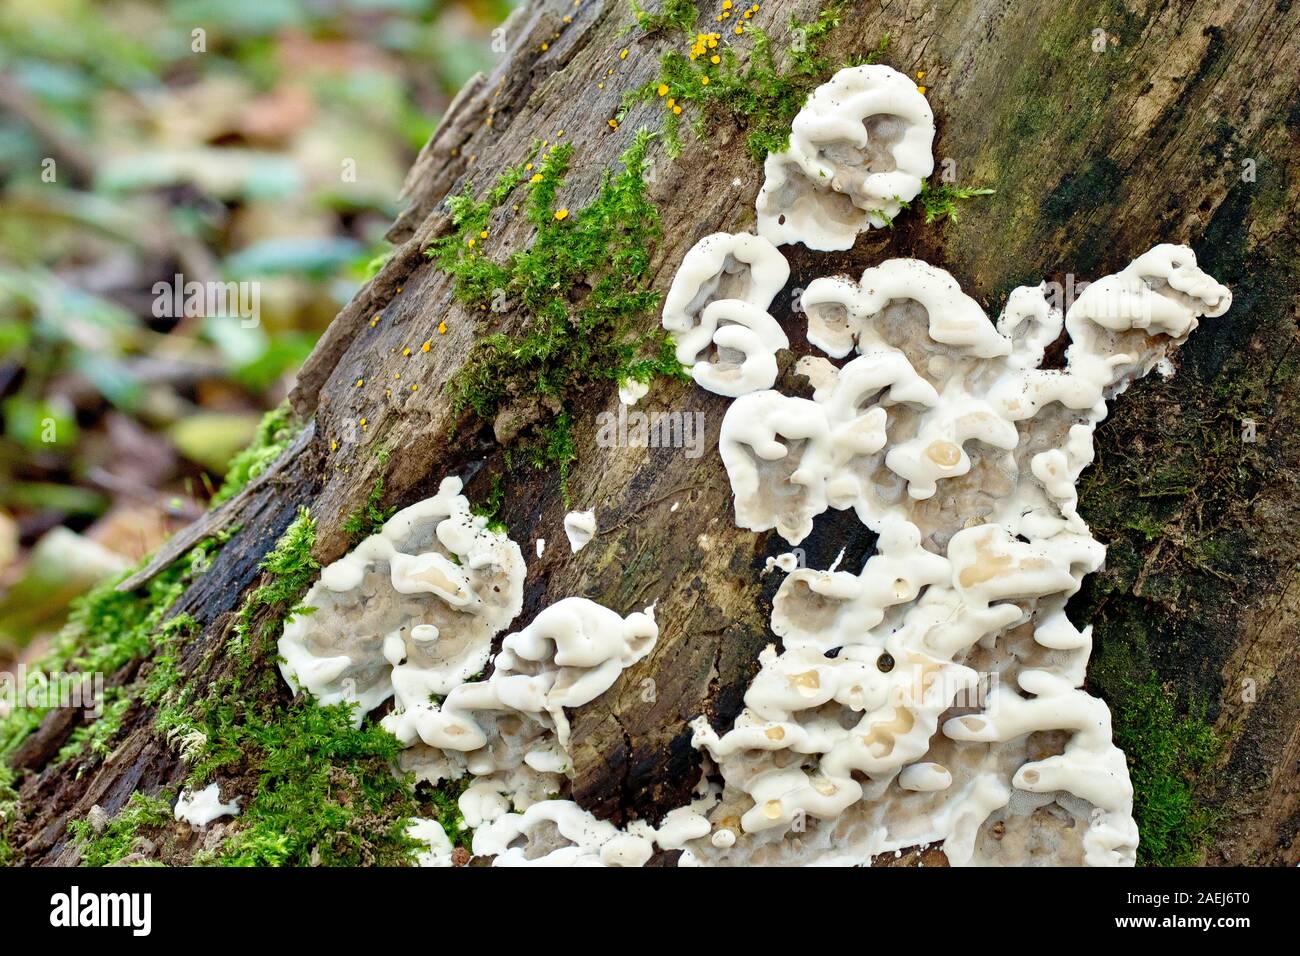 Close up of a slime fungus or mould ( possibly stereum hirsutum ) growing on an old tree stump. Stock Photo